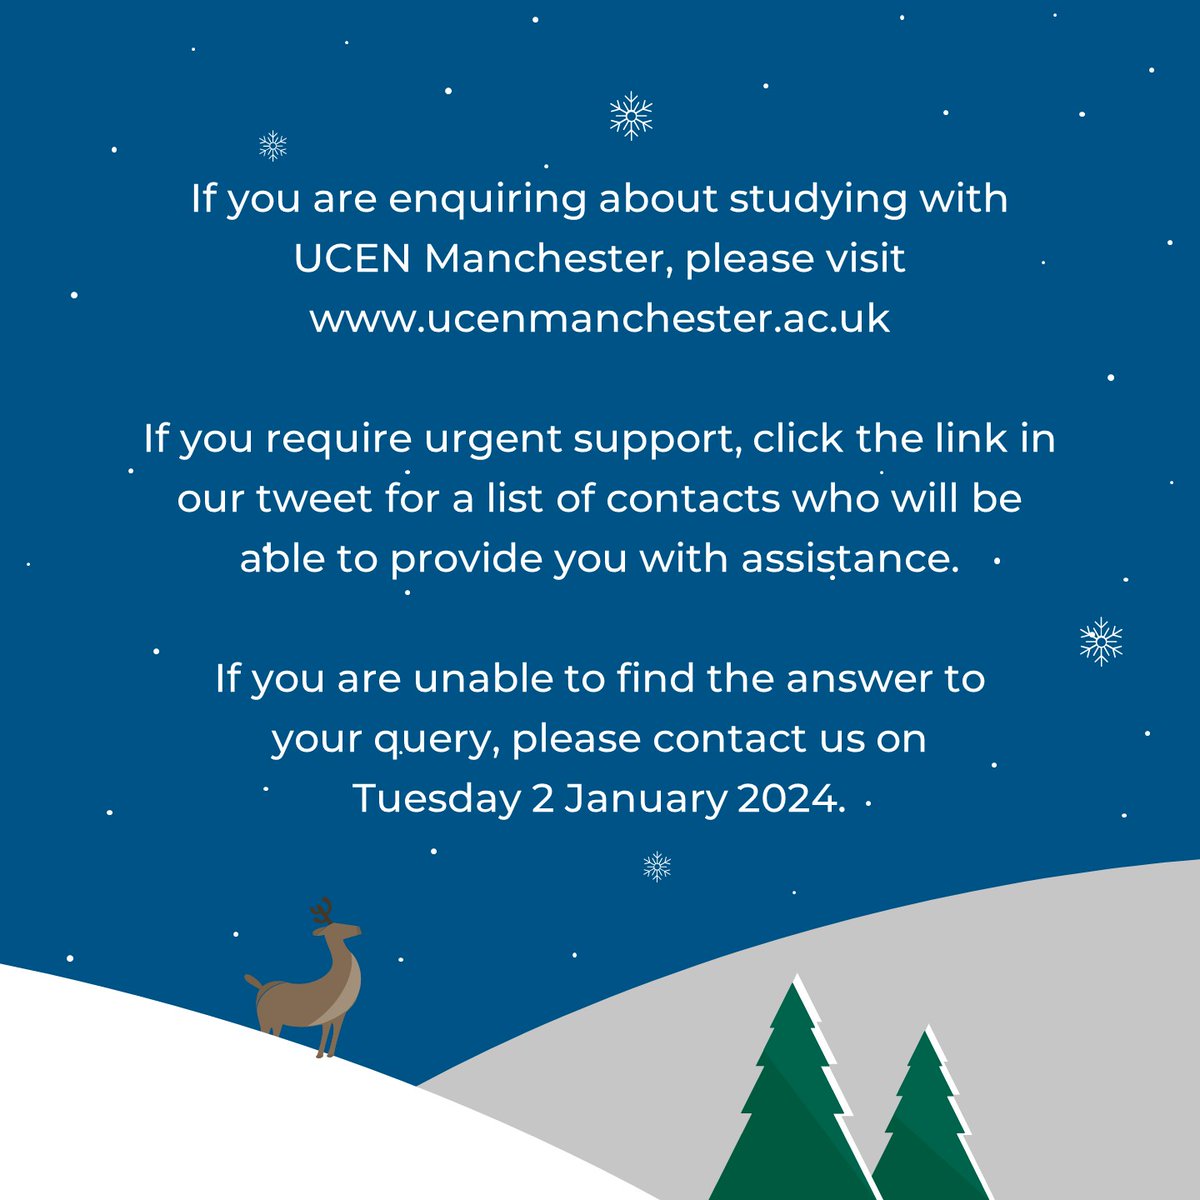 We will be unable to respond to social media enquiries until Tuesday 2 January 2024. If you need support during the festive break, visit ow.ly/WVsw50Ql09Y for a handy list of contacts who will be able to provide you with assistance.